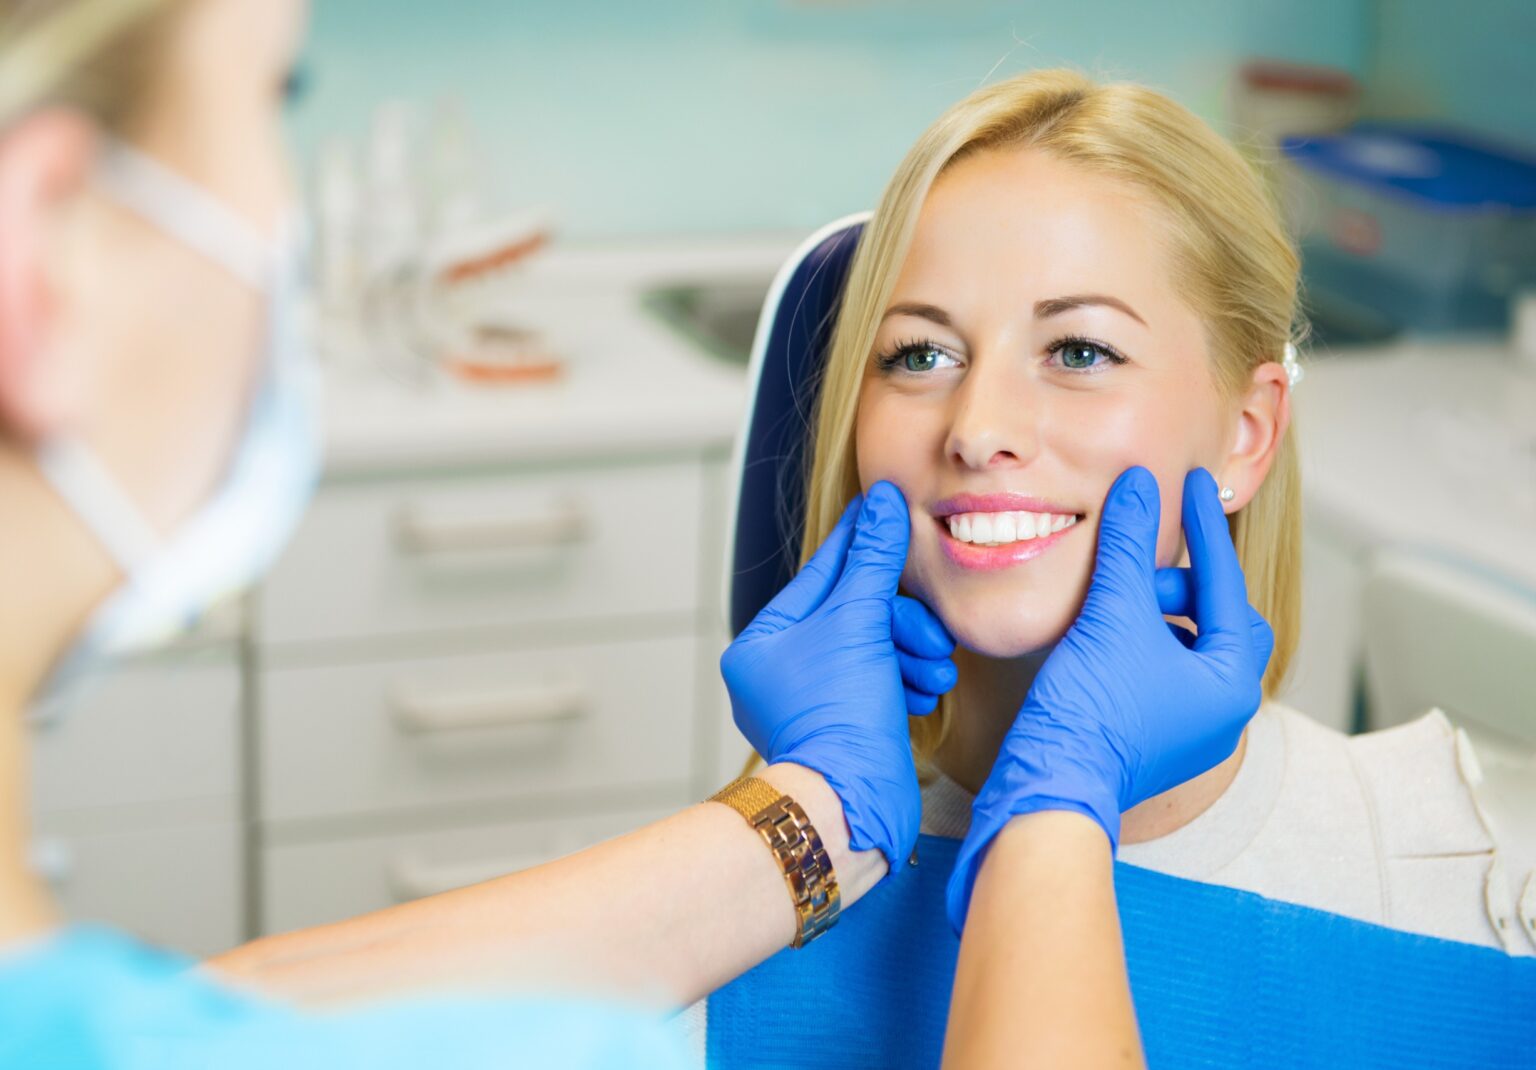 How Long Does it Take to Recover After Getting Dental Implants?